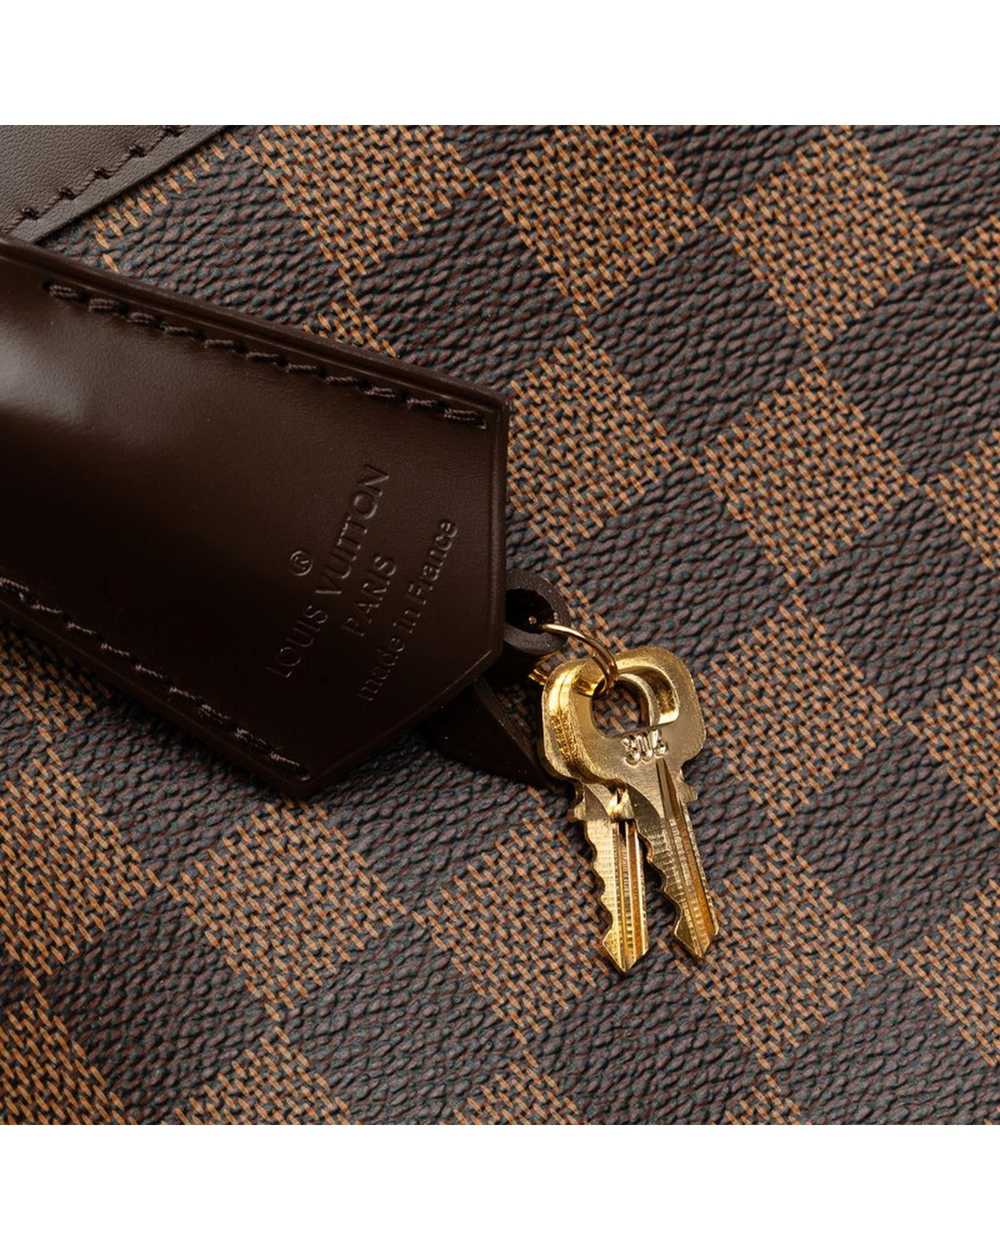 Louis Vuitton Brown Leather Verona PM Bag in Exce… - image 9